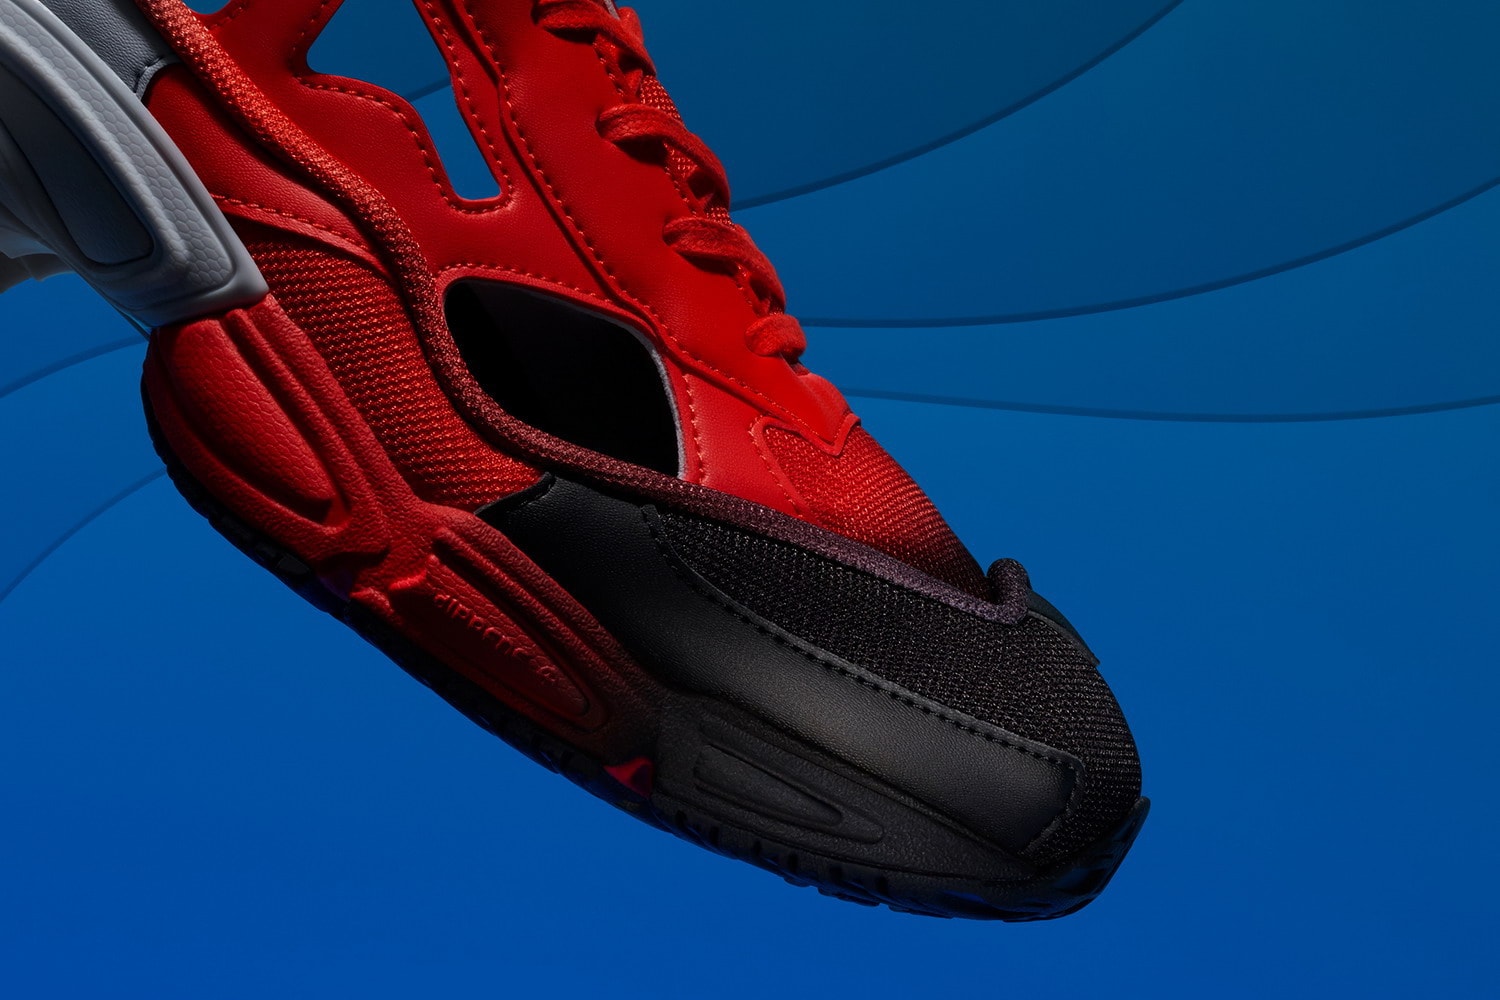 adidas by Raf Simons 2019 春夏全新 RS Detroit Runner 及 RS Ozweego Replicant 系列